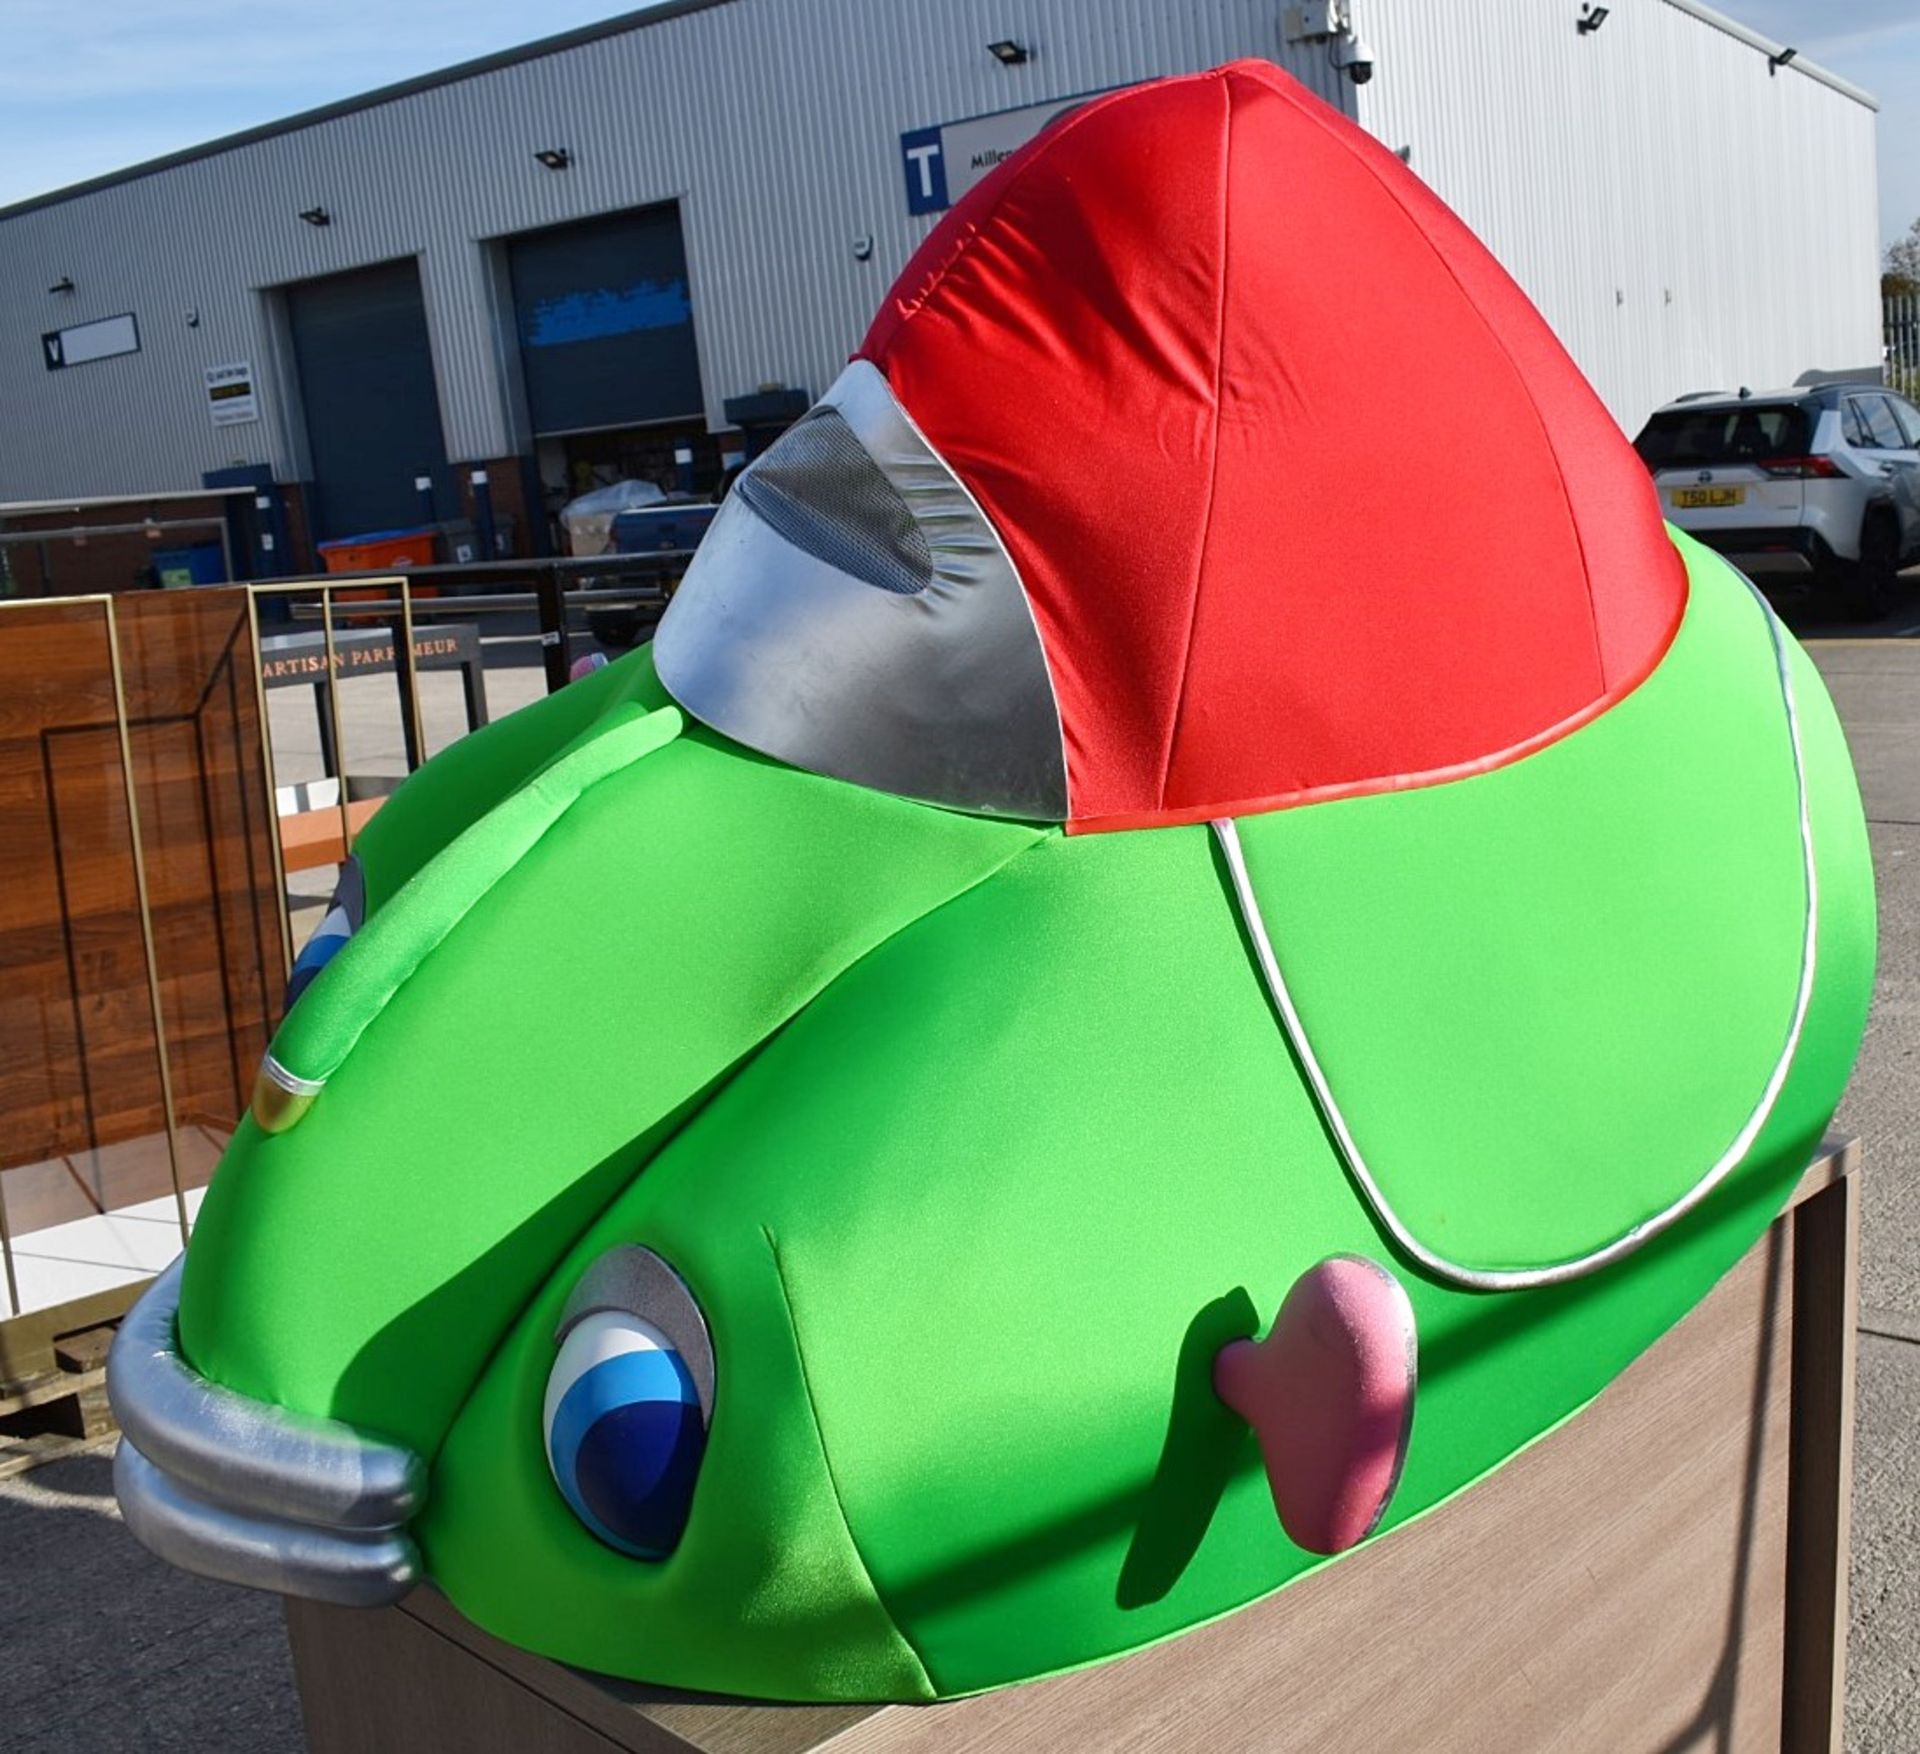 1 x Professional Mascot Character Costume of a 3-Wheeled Car In Green - Image 7 of 15